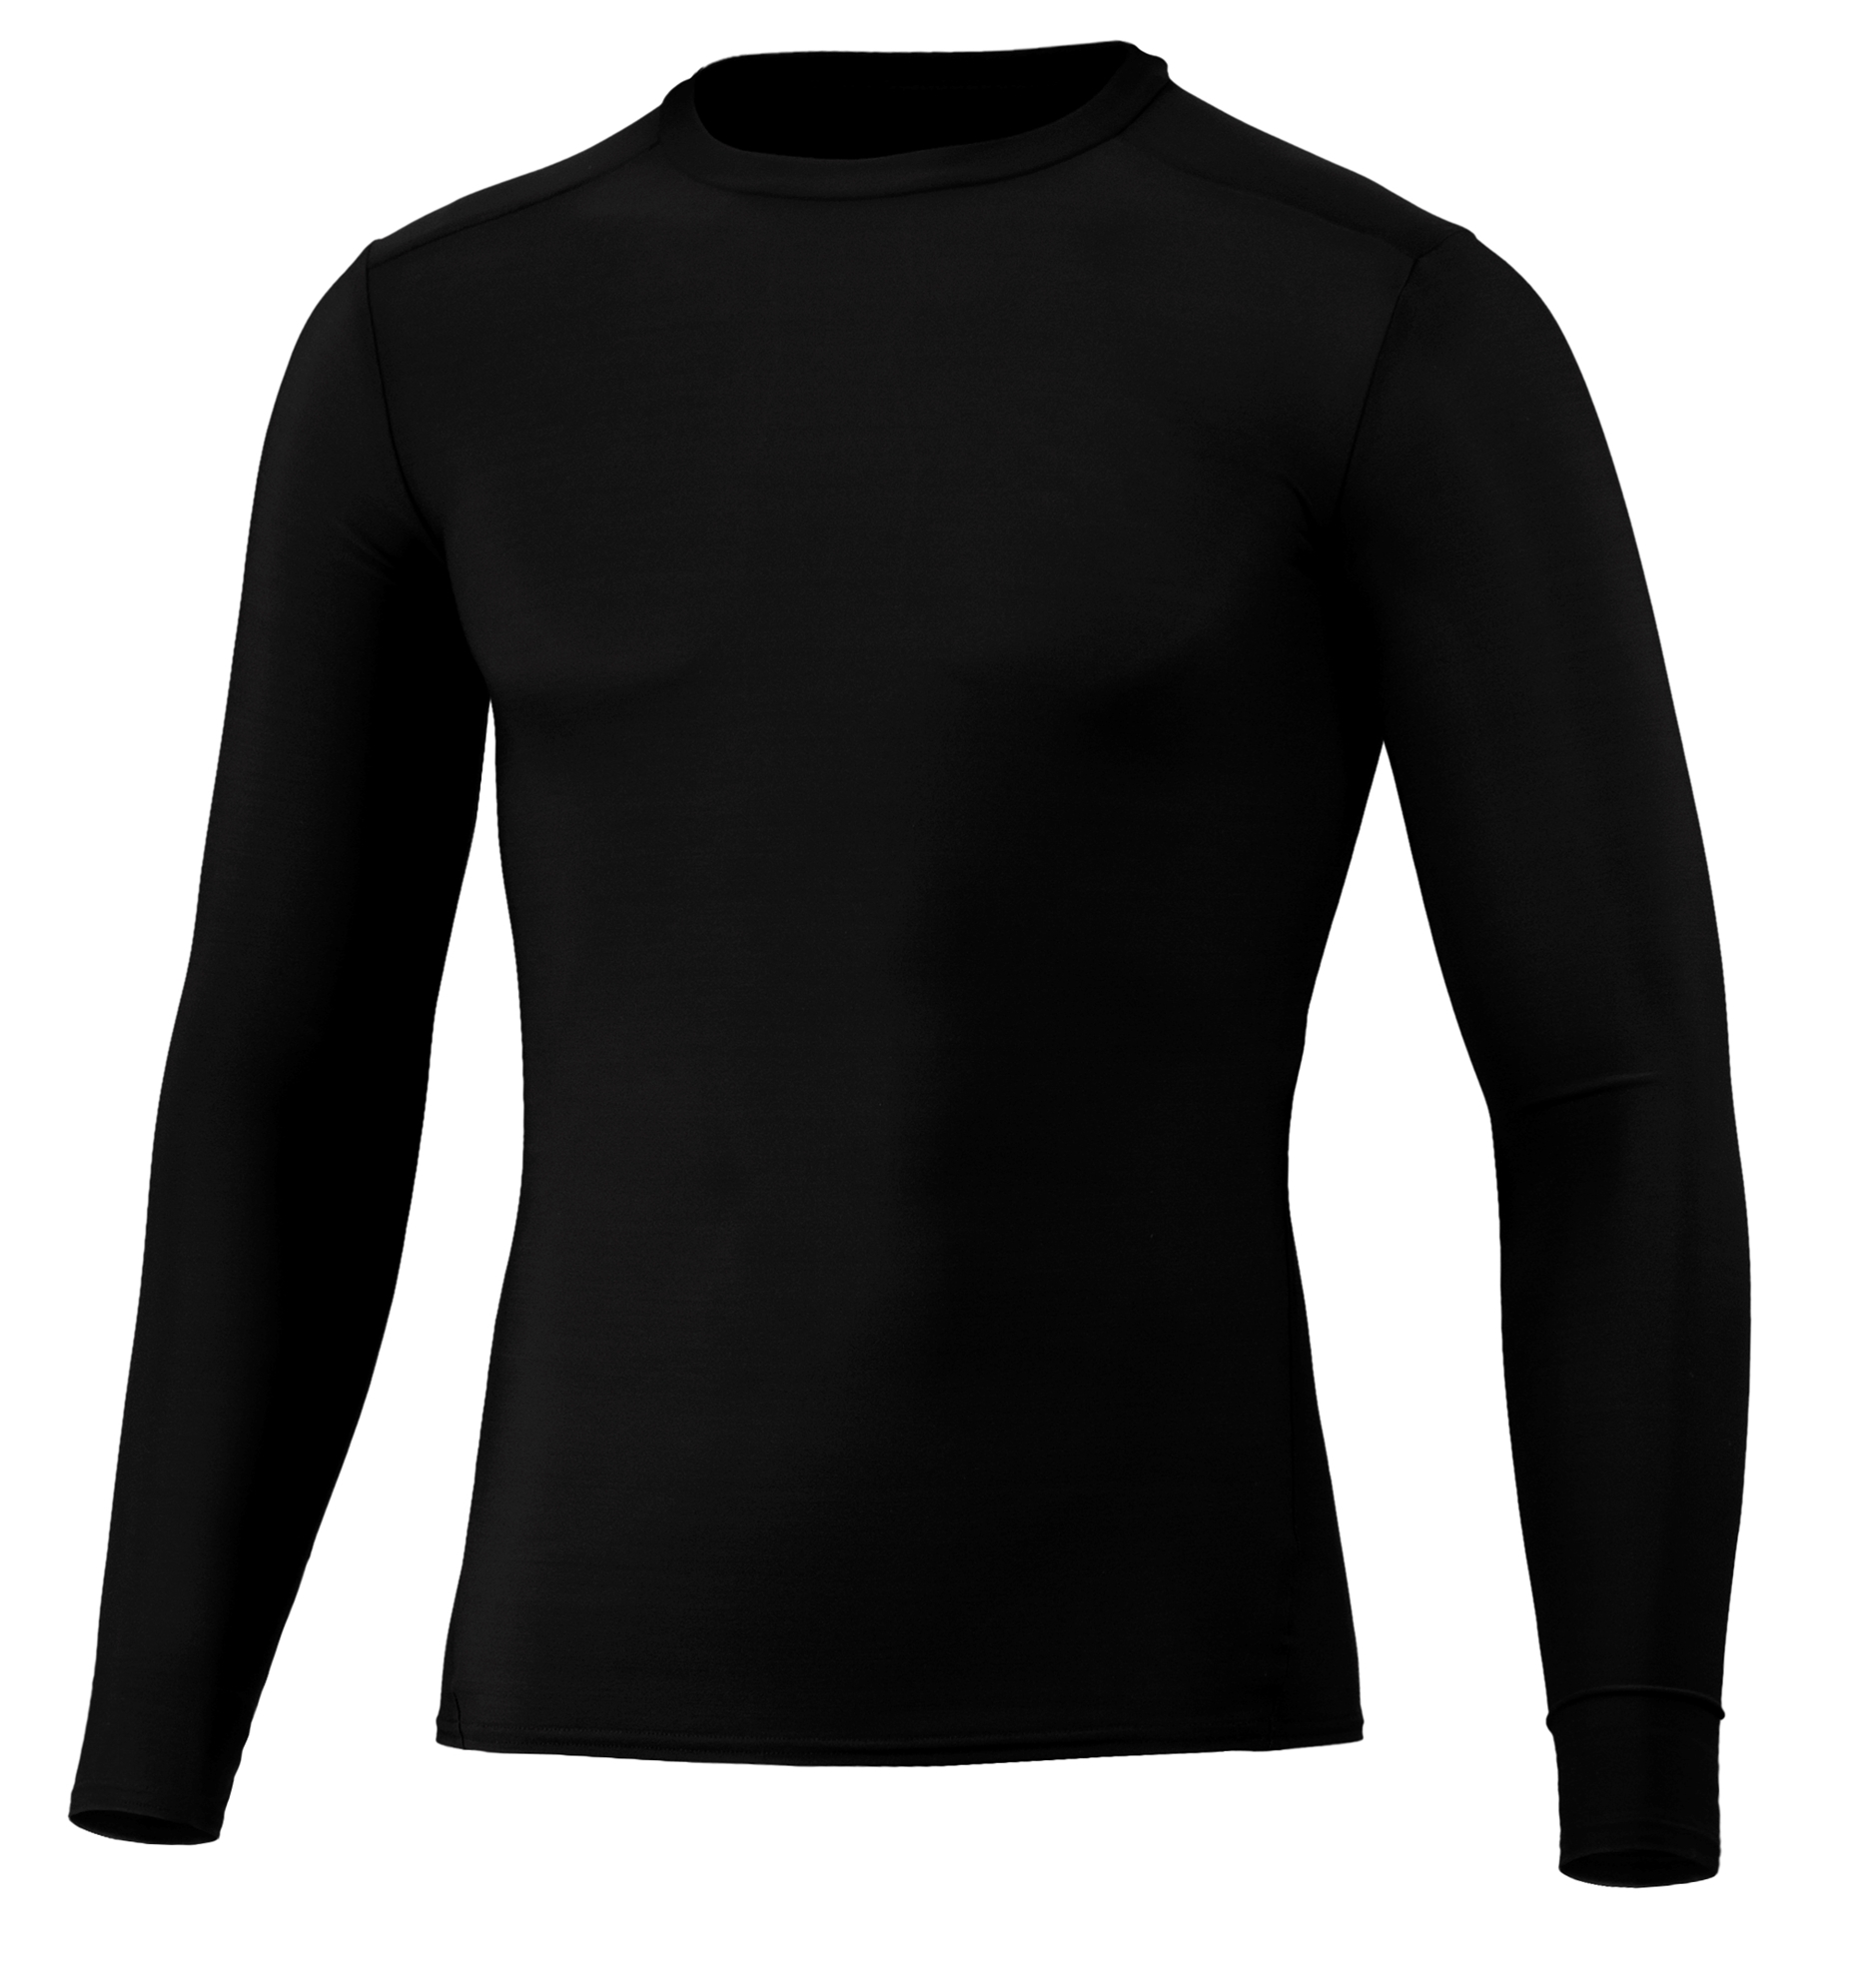 BAW Athletic Wear CT102 - Men's Compression Long Sleeve T-Shirt